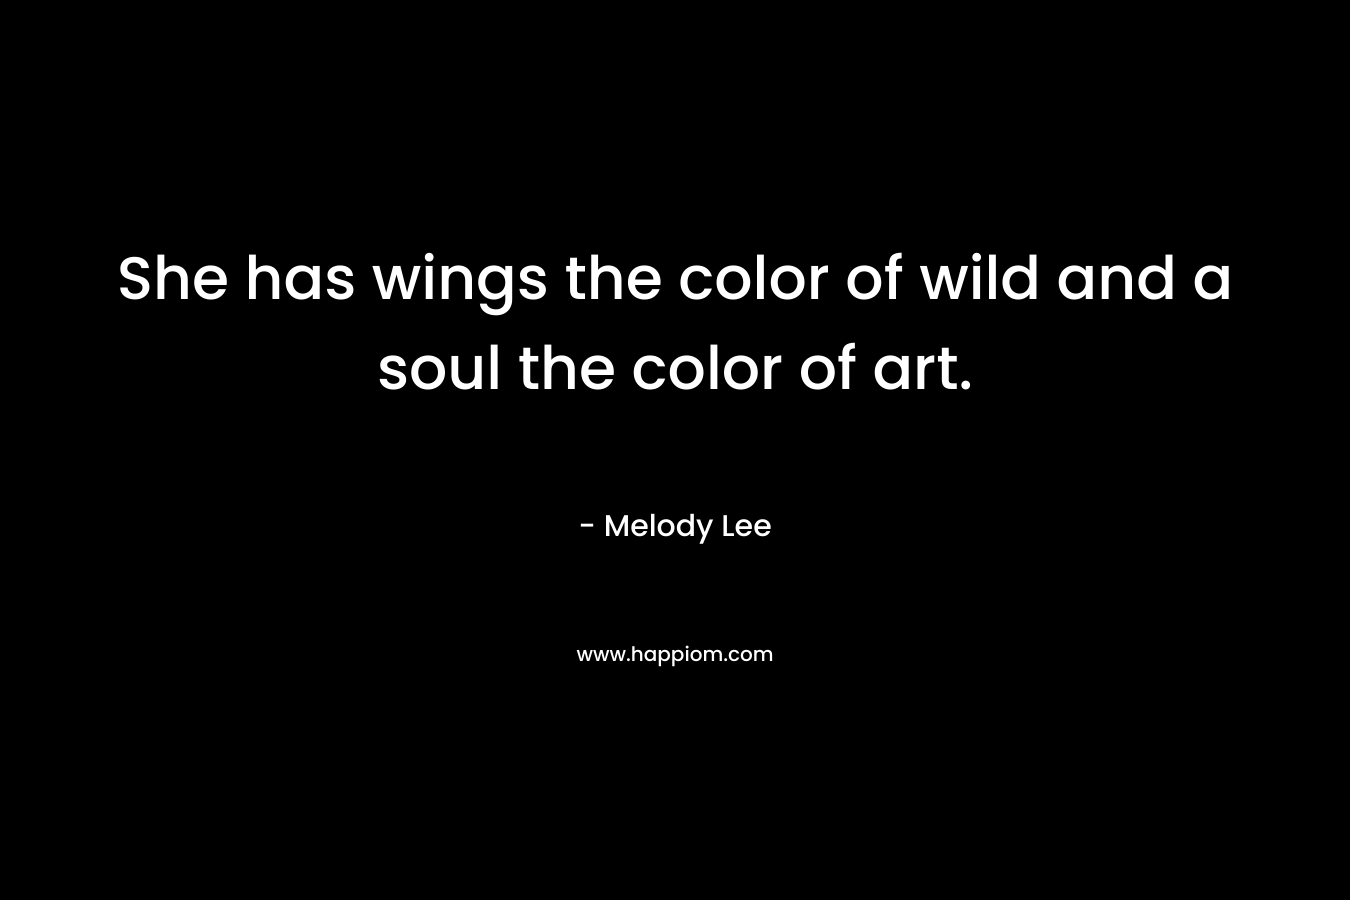 She has wings the color of wild and a soul the color of art.